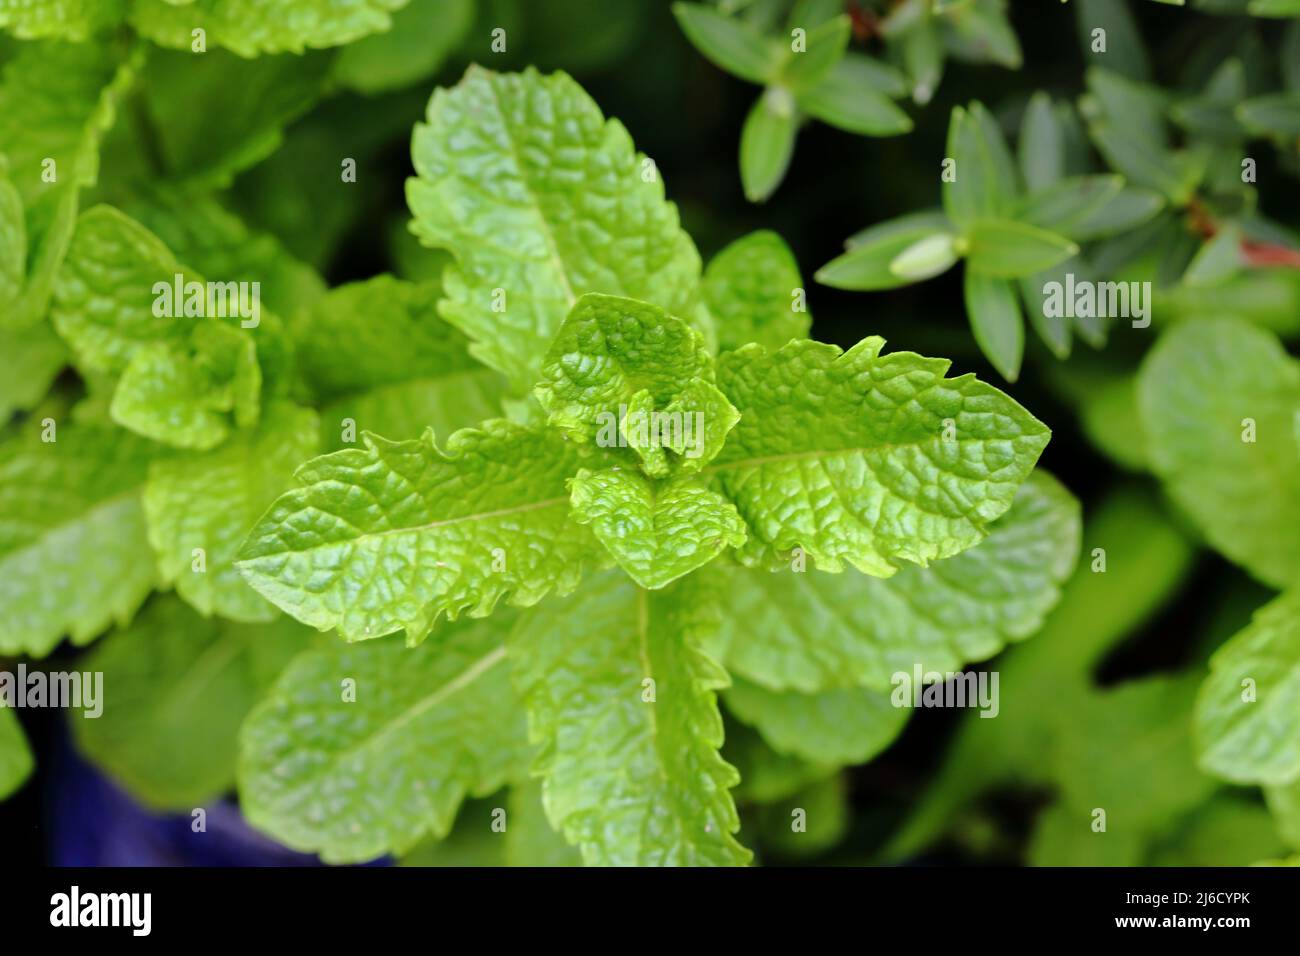 Shot of the plant leaves of the aromatic herb mint (Mentha) Stock Photo